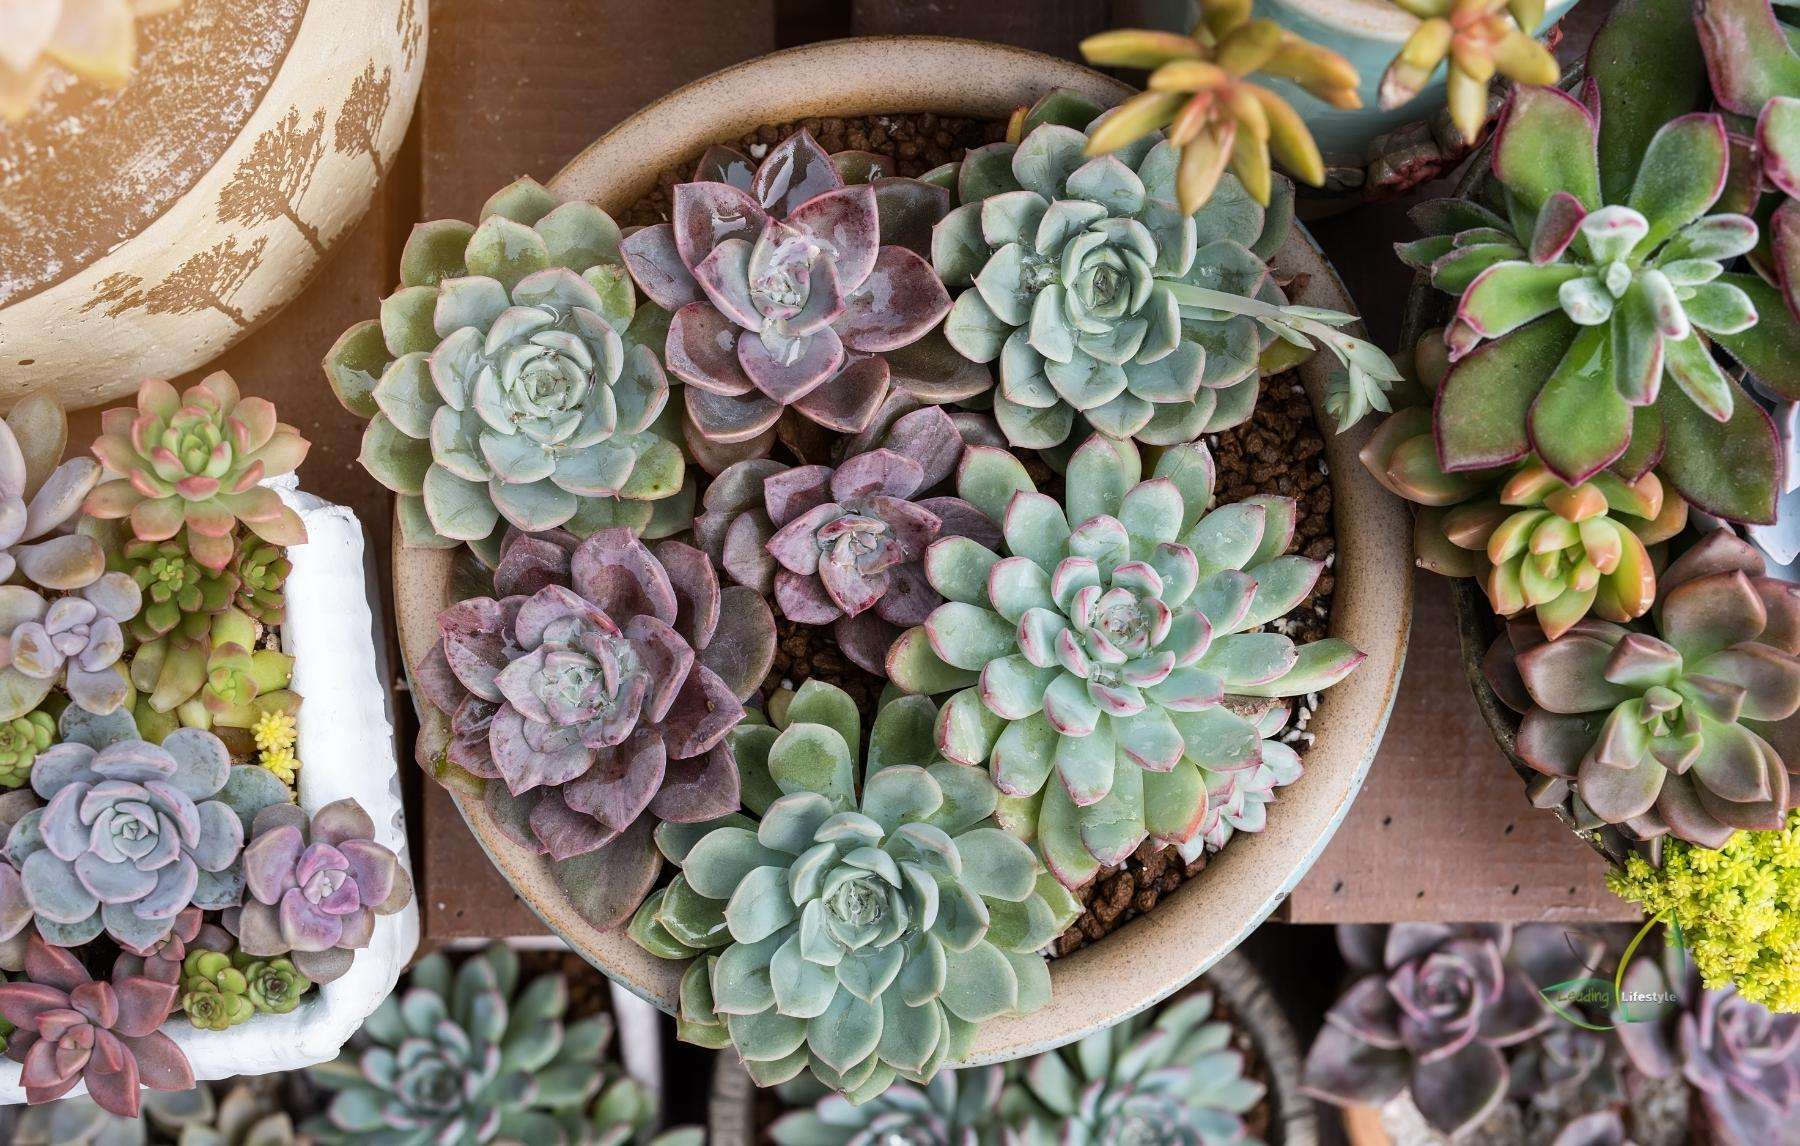 Planting Succulents: The Easiest Way to Brighten Your Home